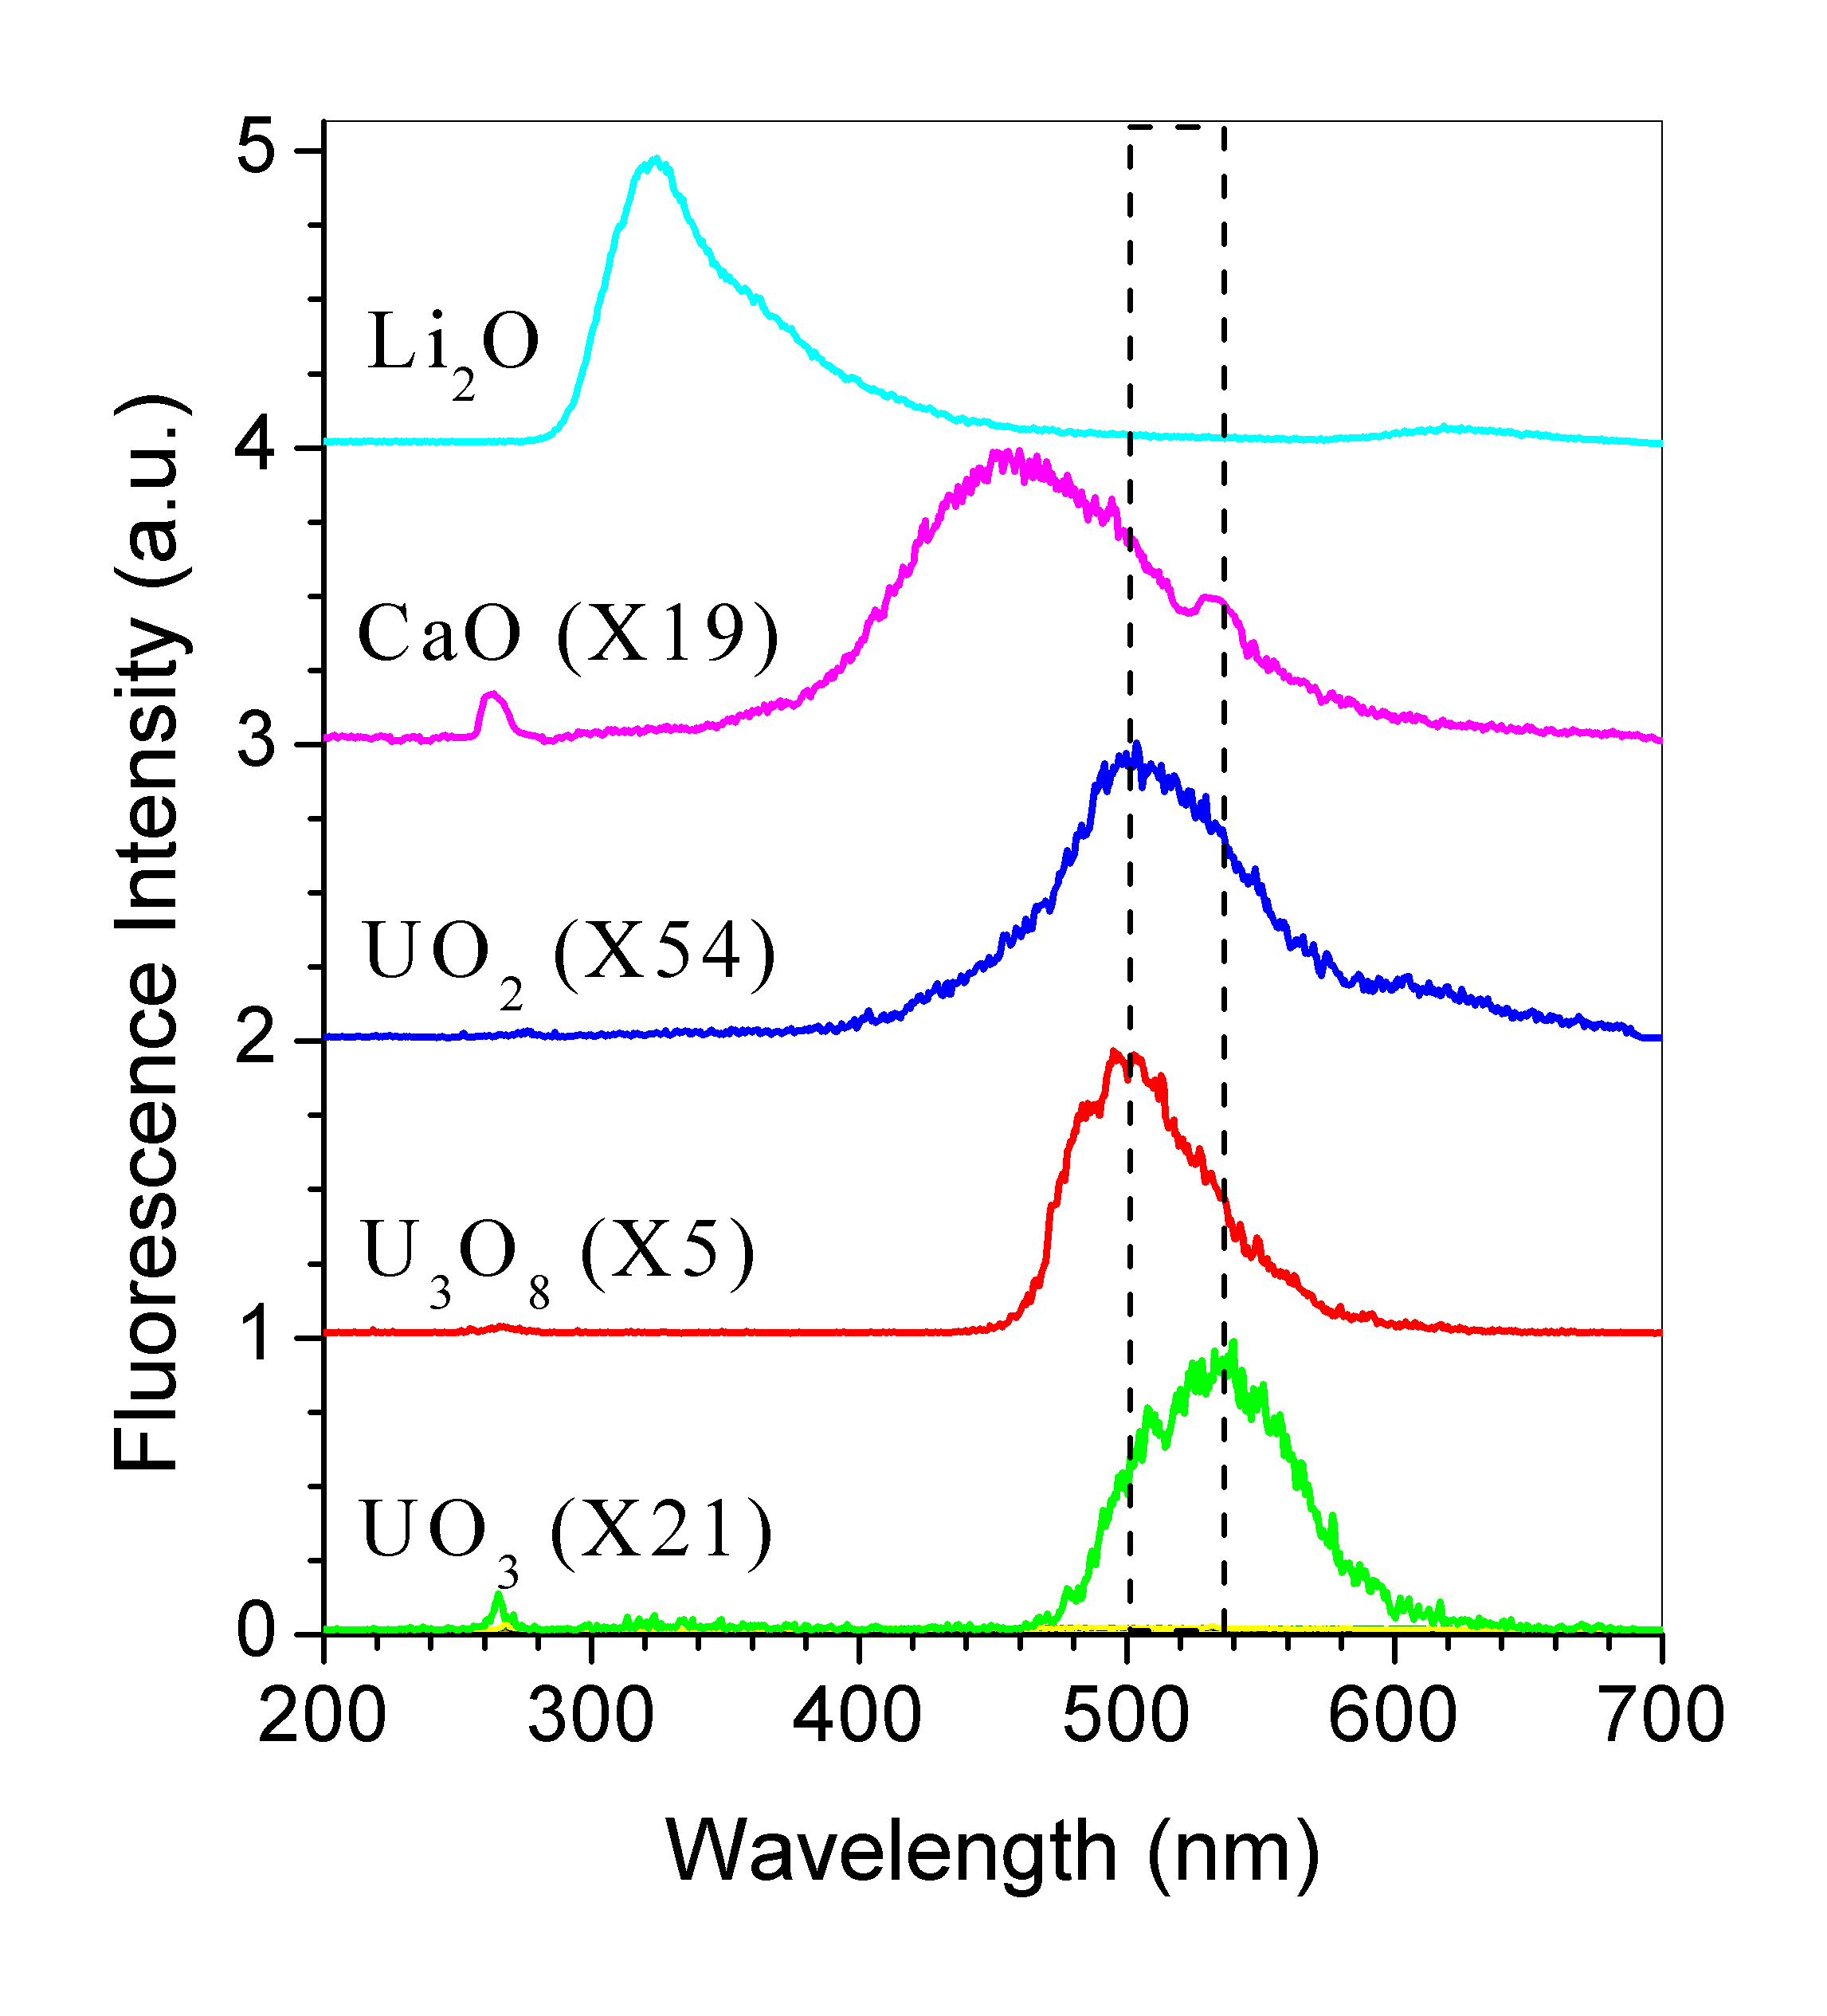 Figure 3. Fluorescence spectra of UO2, UO3, CaO, Li2O particles, and U3O8 in 5% HNO3 solvent excited by a 266 nm laser.